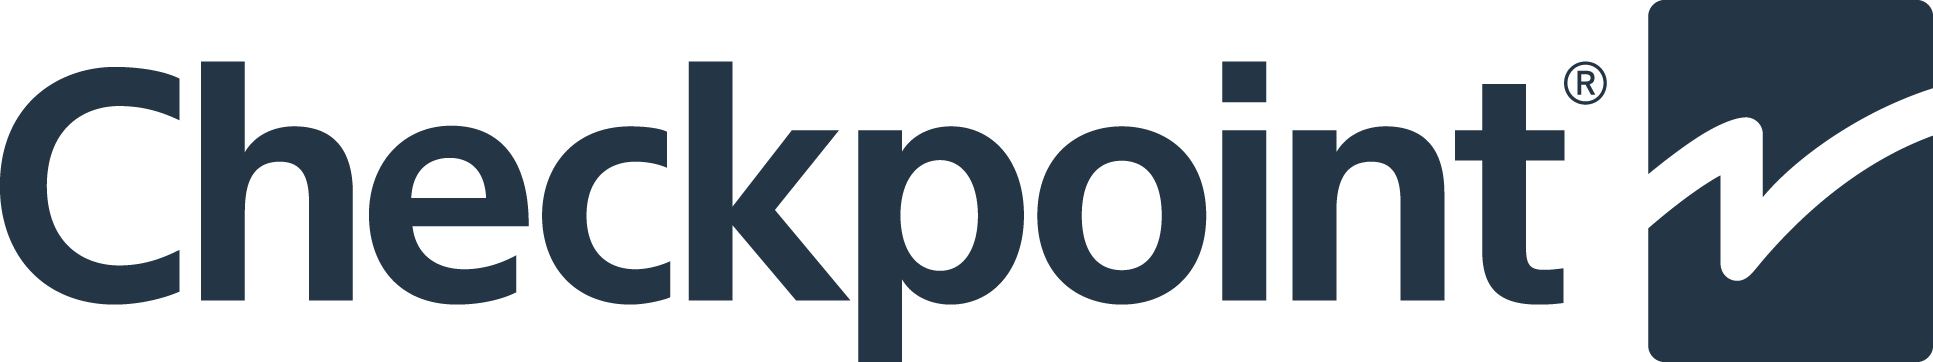 Checkpoint-Primary-Logo-Navy.png